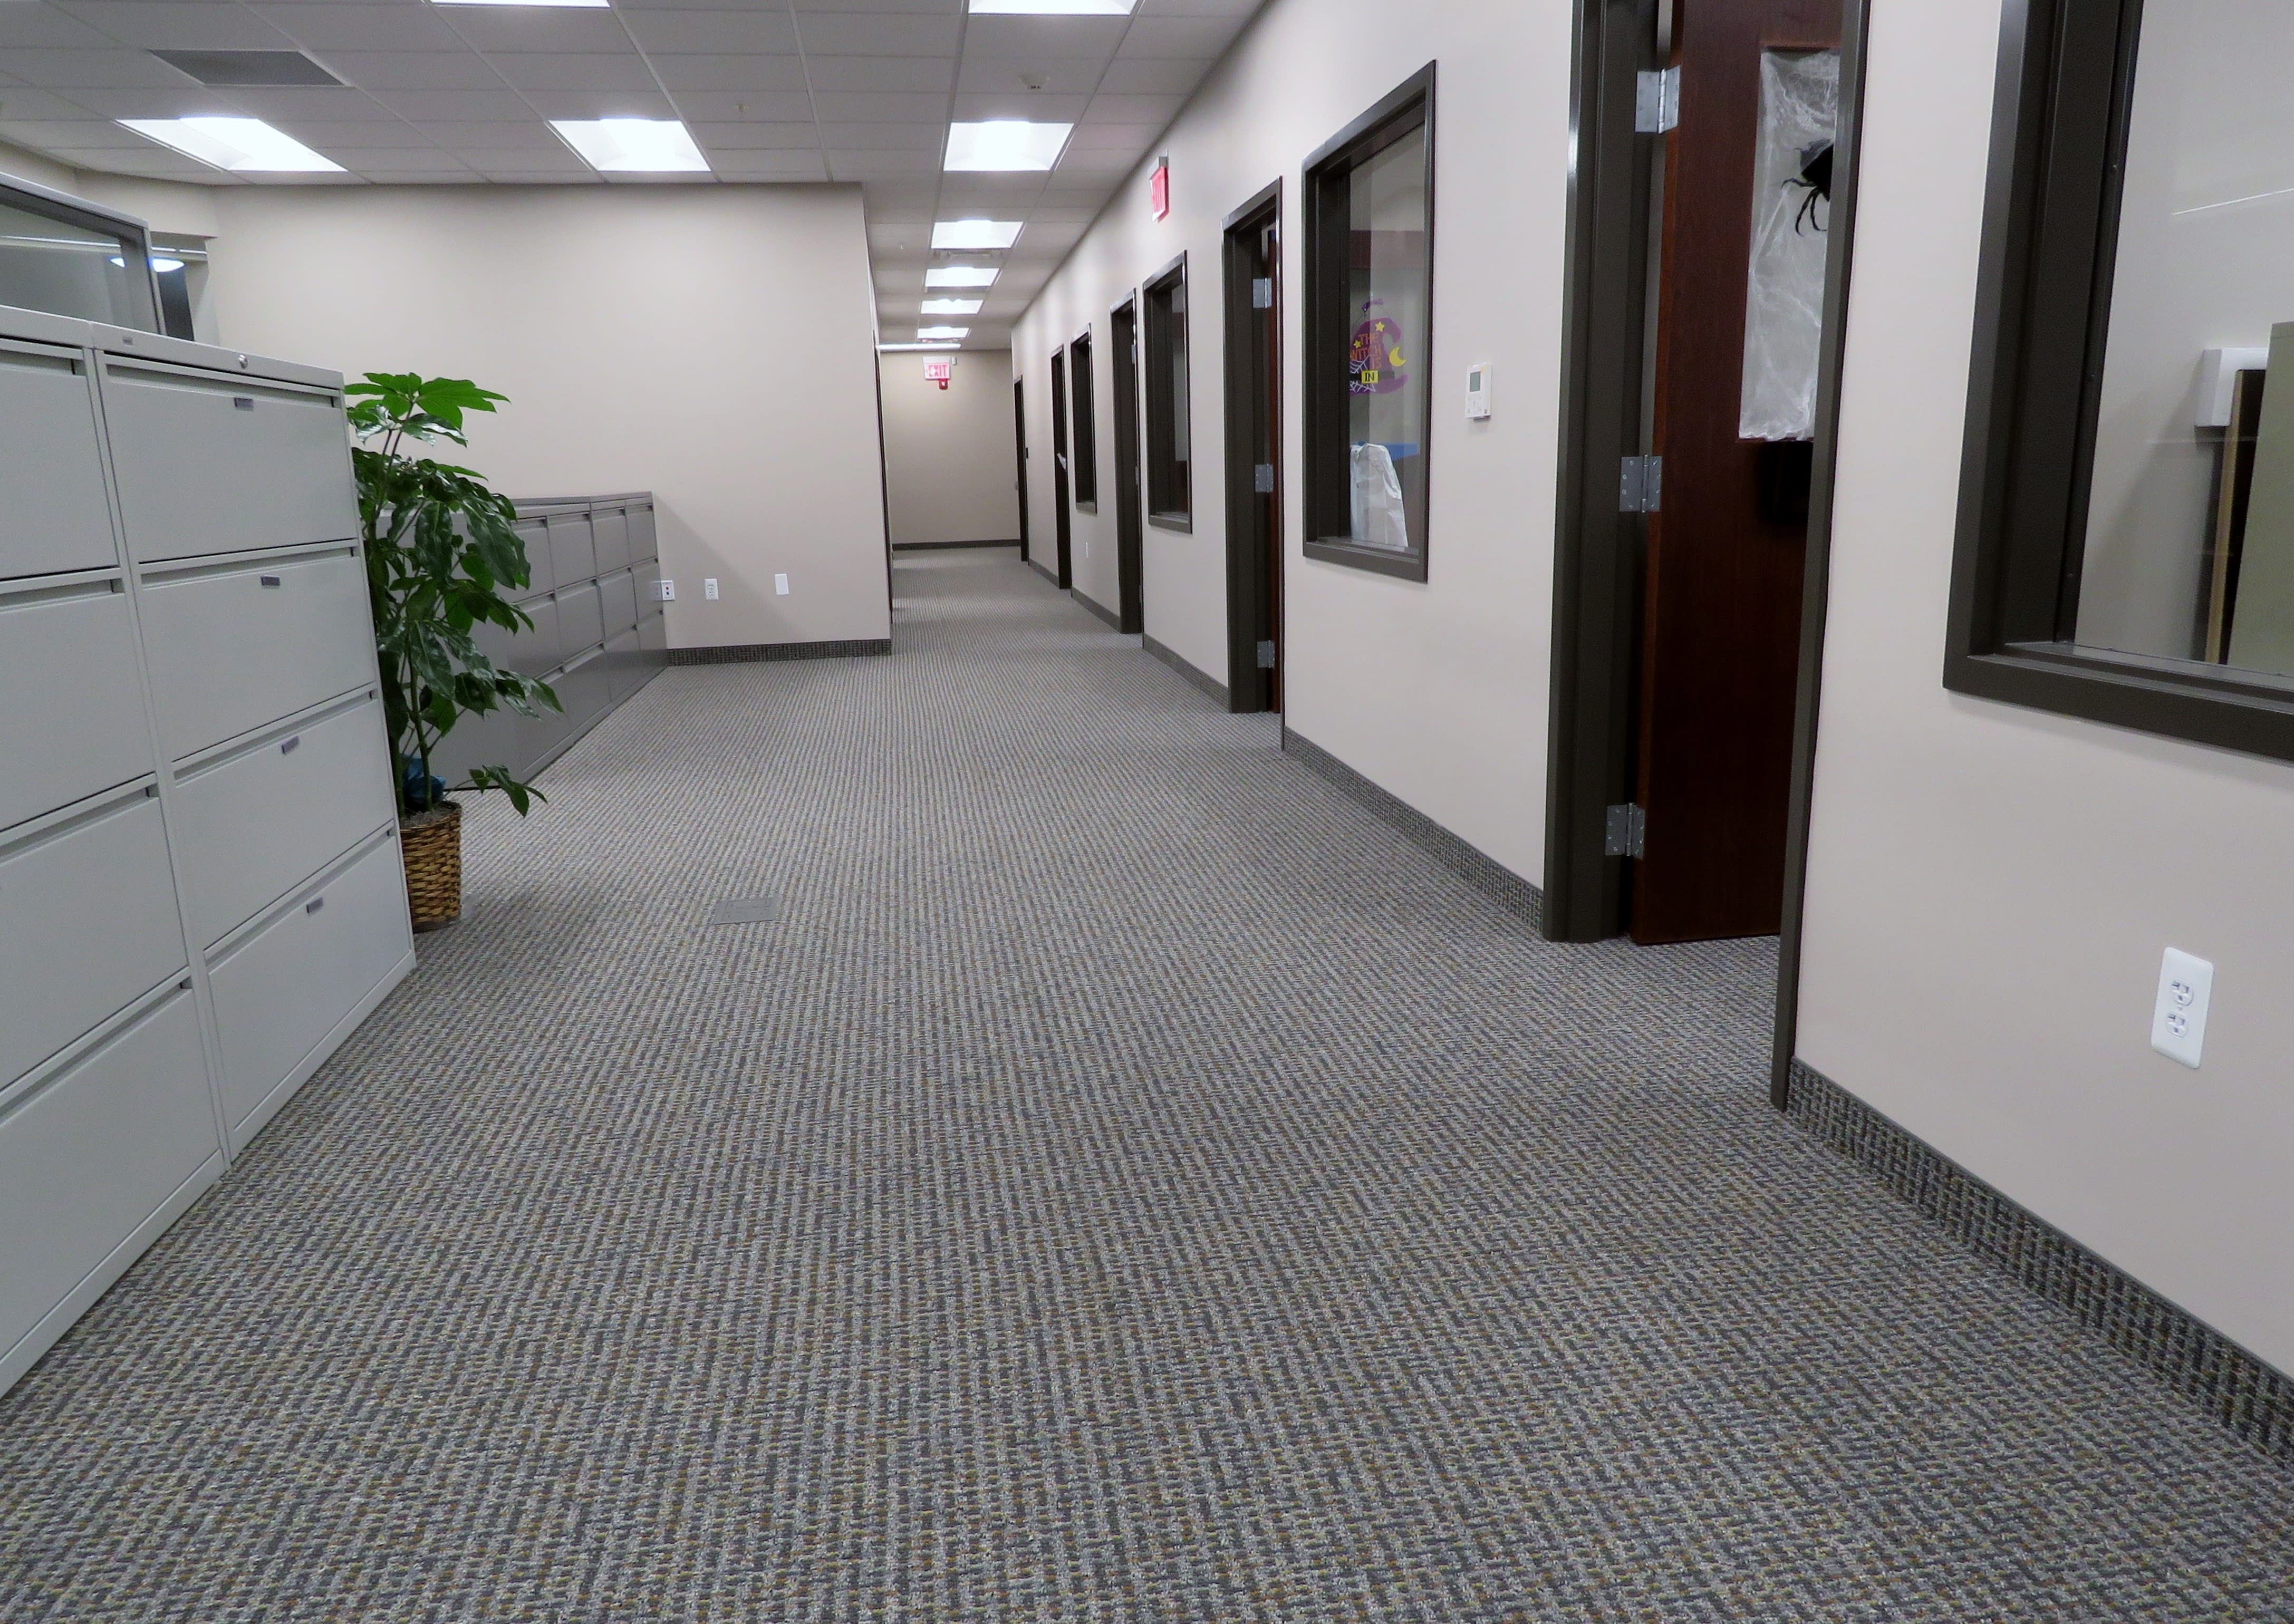 Commercial carpet flooring in Marysville, MI from Independent Floor Covering